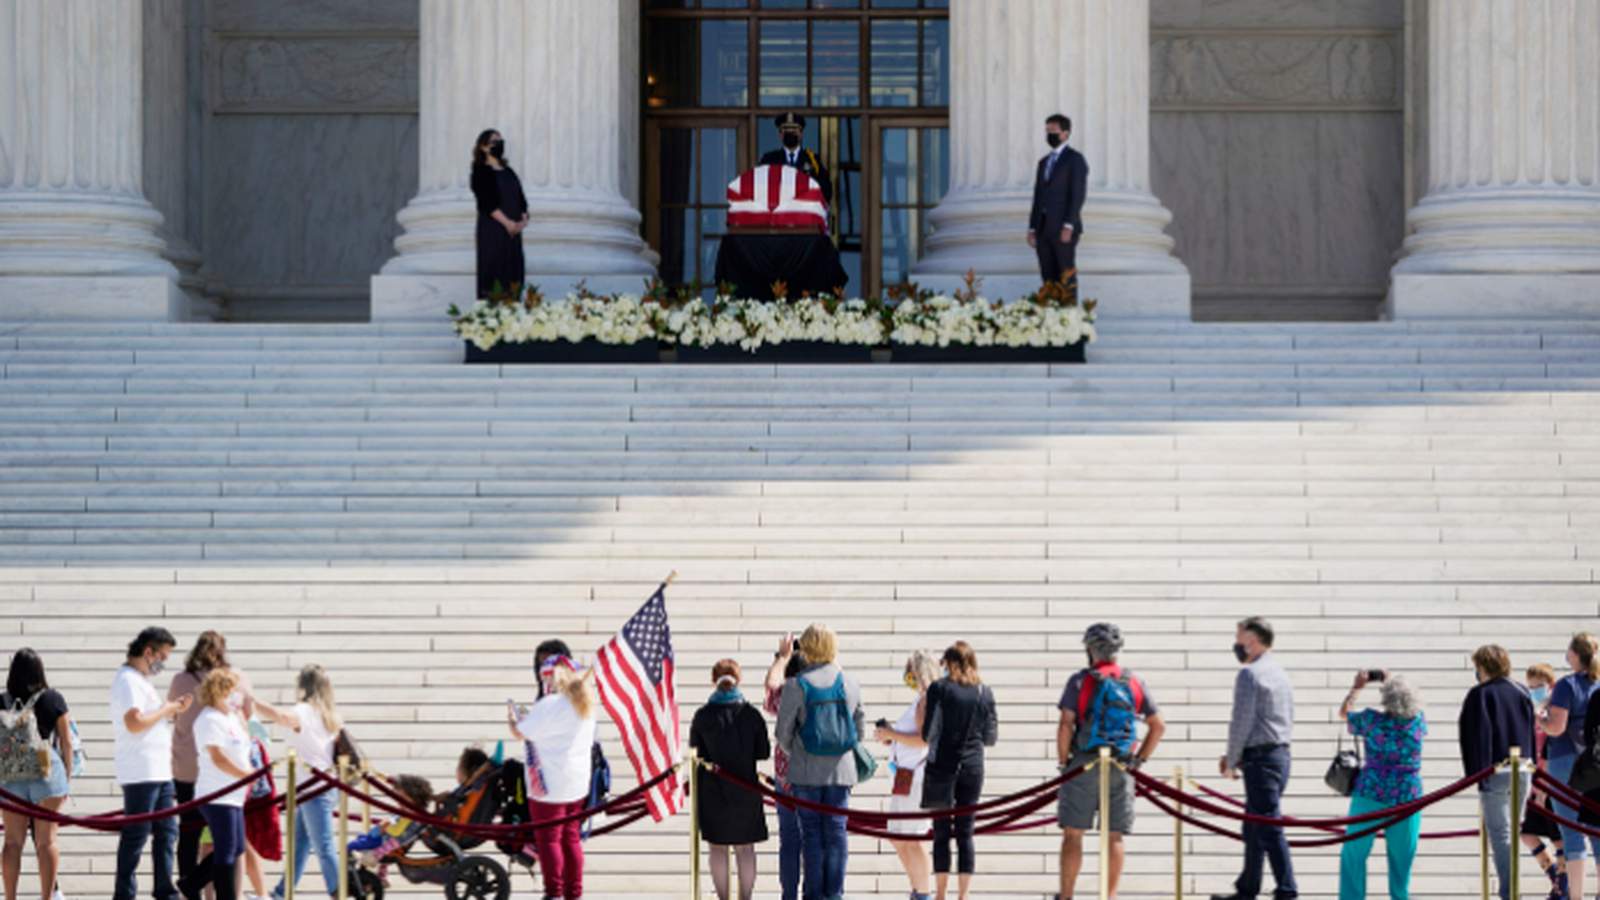 WATCH LIVE: Long lines of mourners pay respects to Ginsburg outside Supreme Court